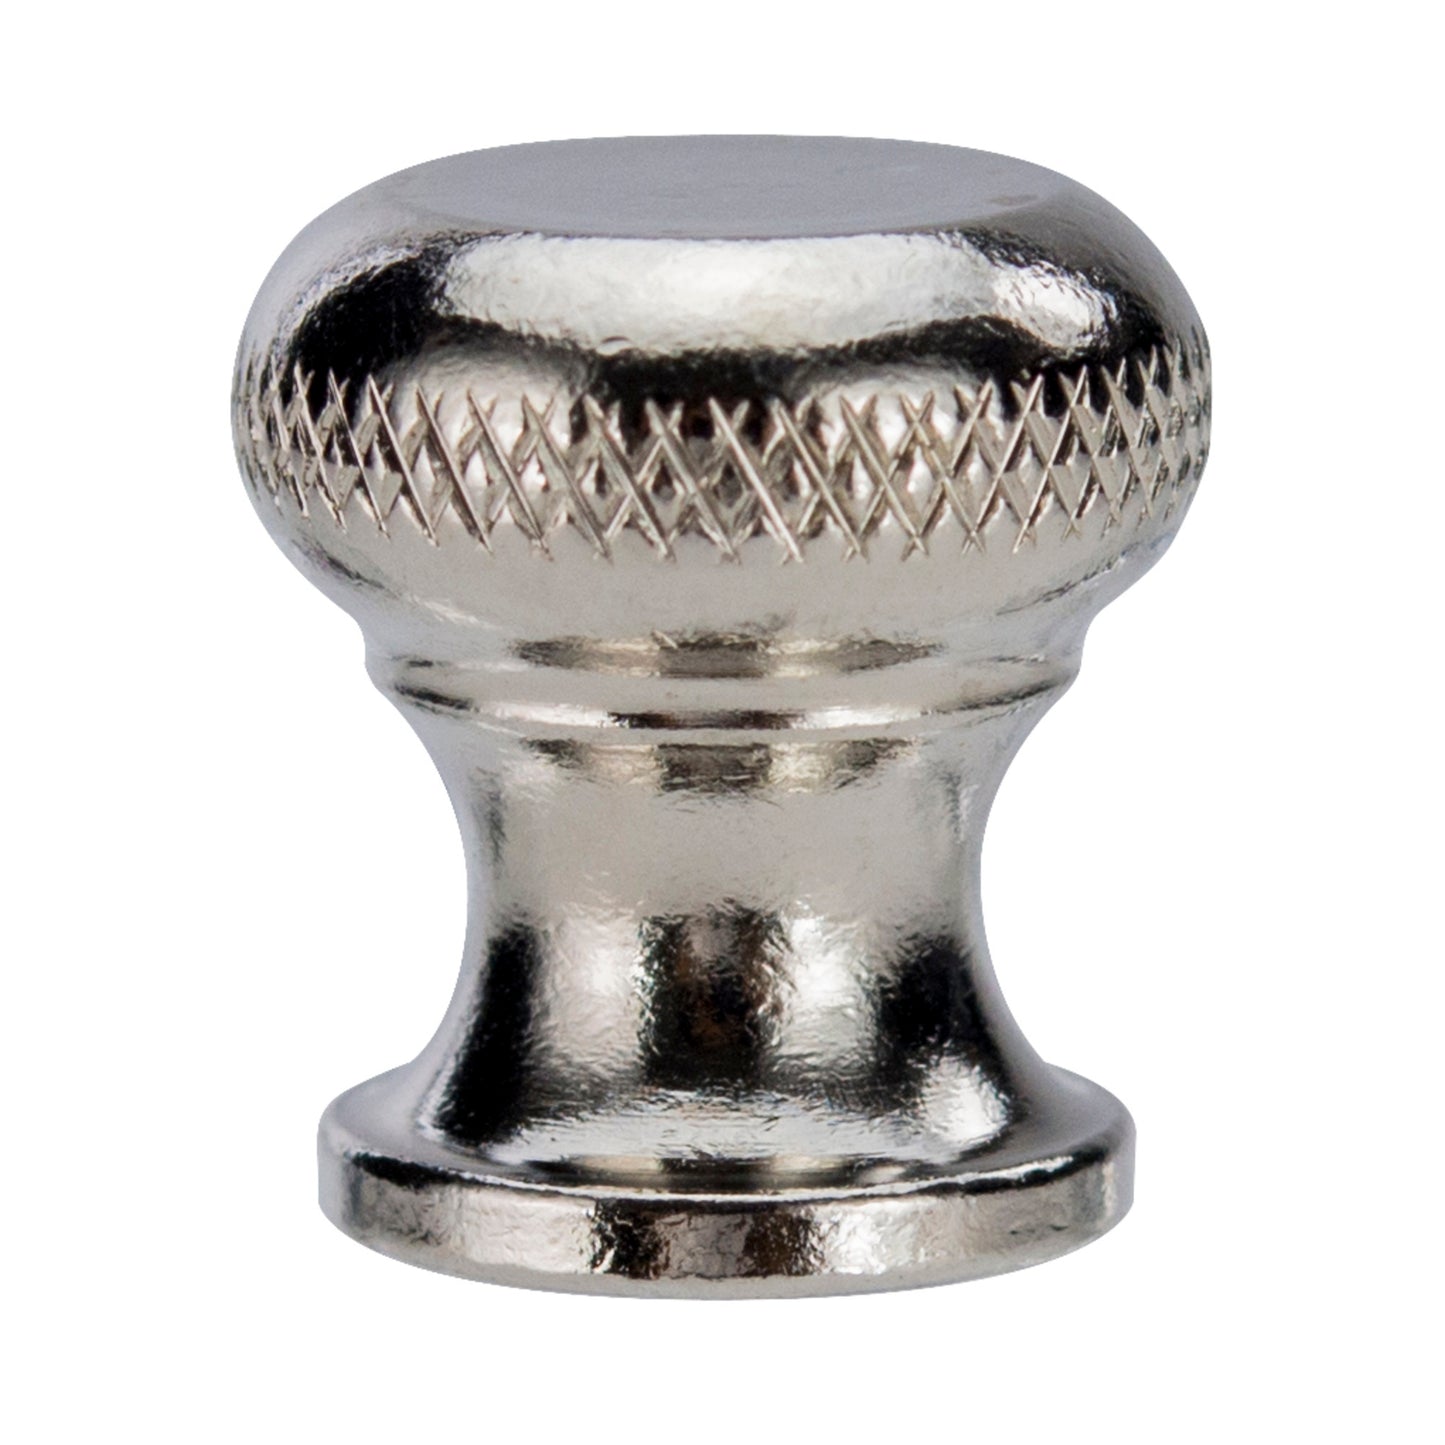 WPM-8K - Replacement Knob for 8" Pepper Mills